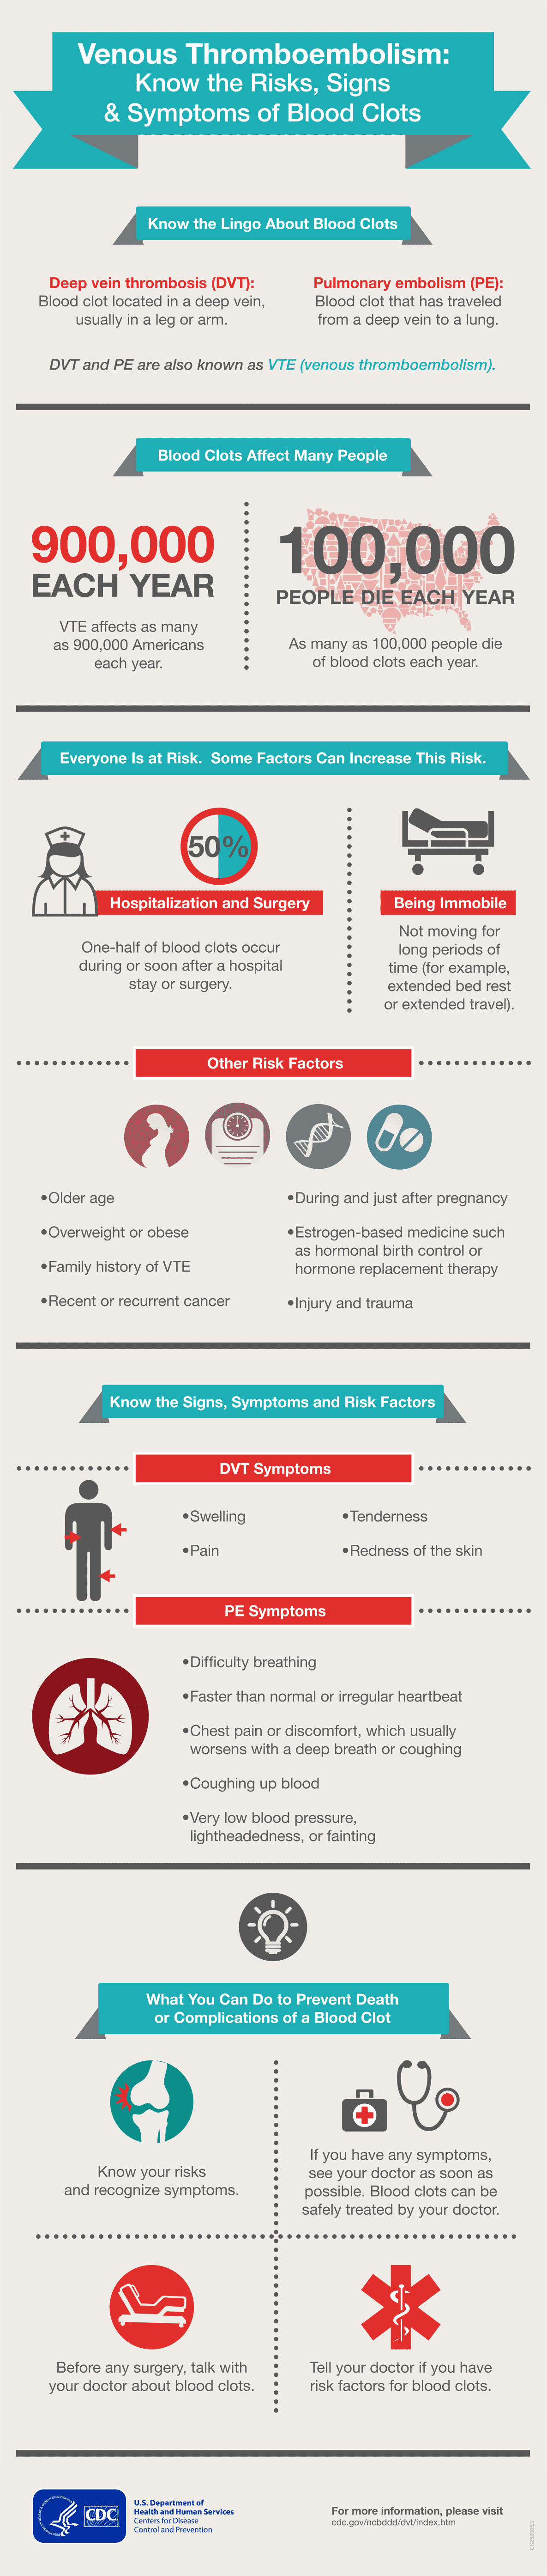 VTE Know the Risks Signs and Symptoms Infographic